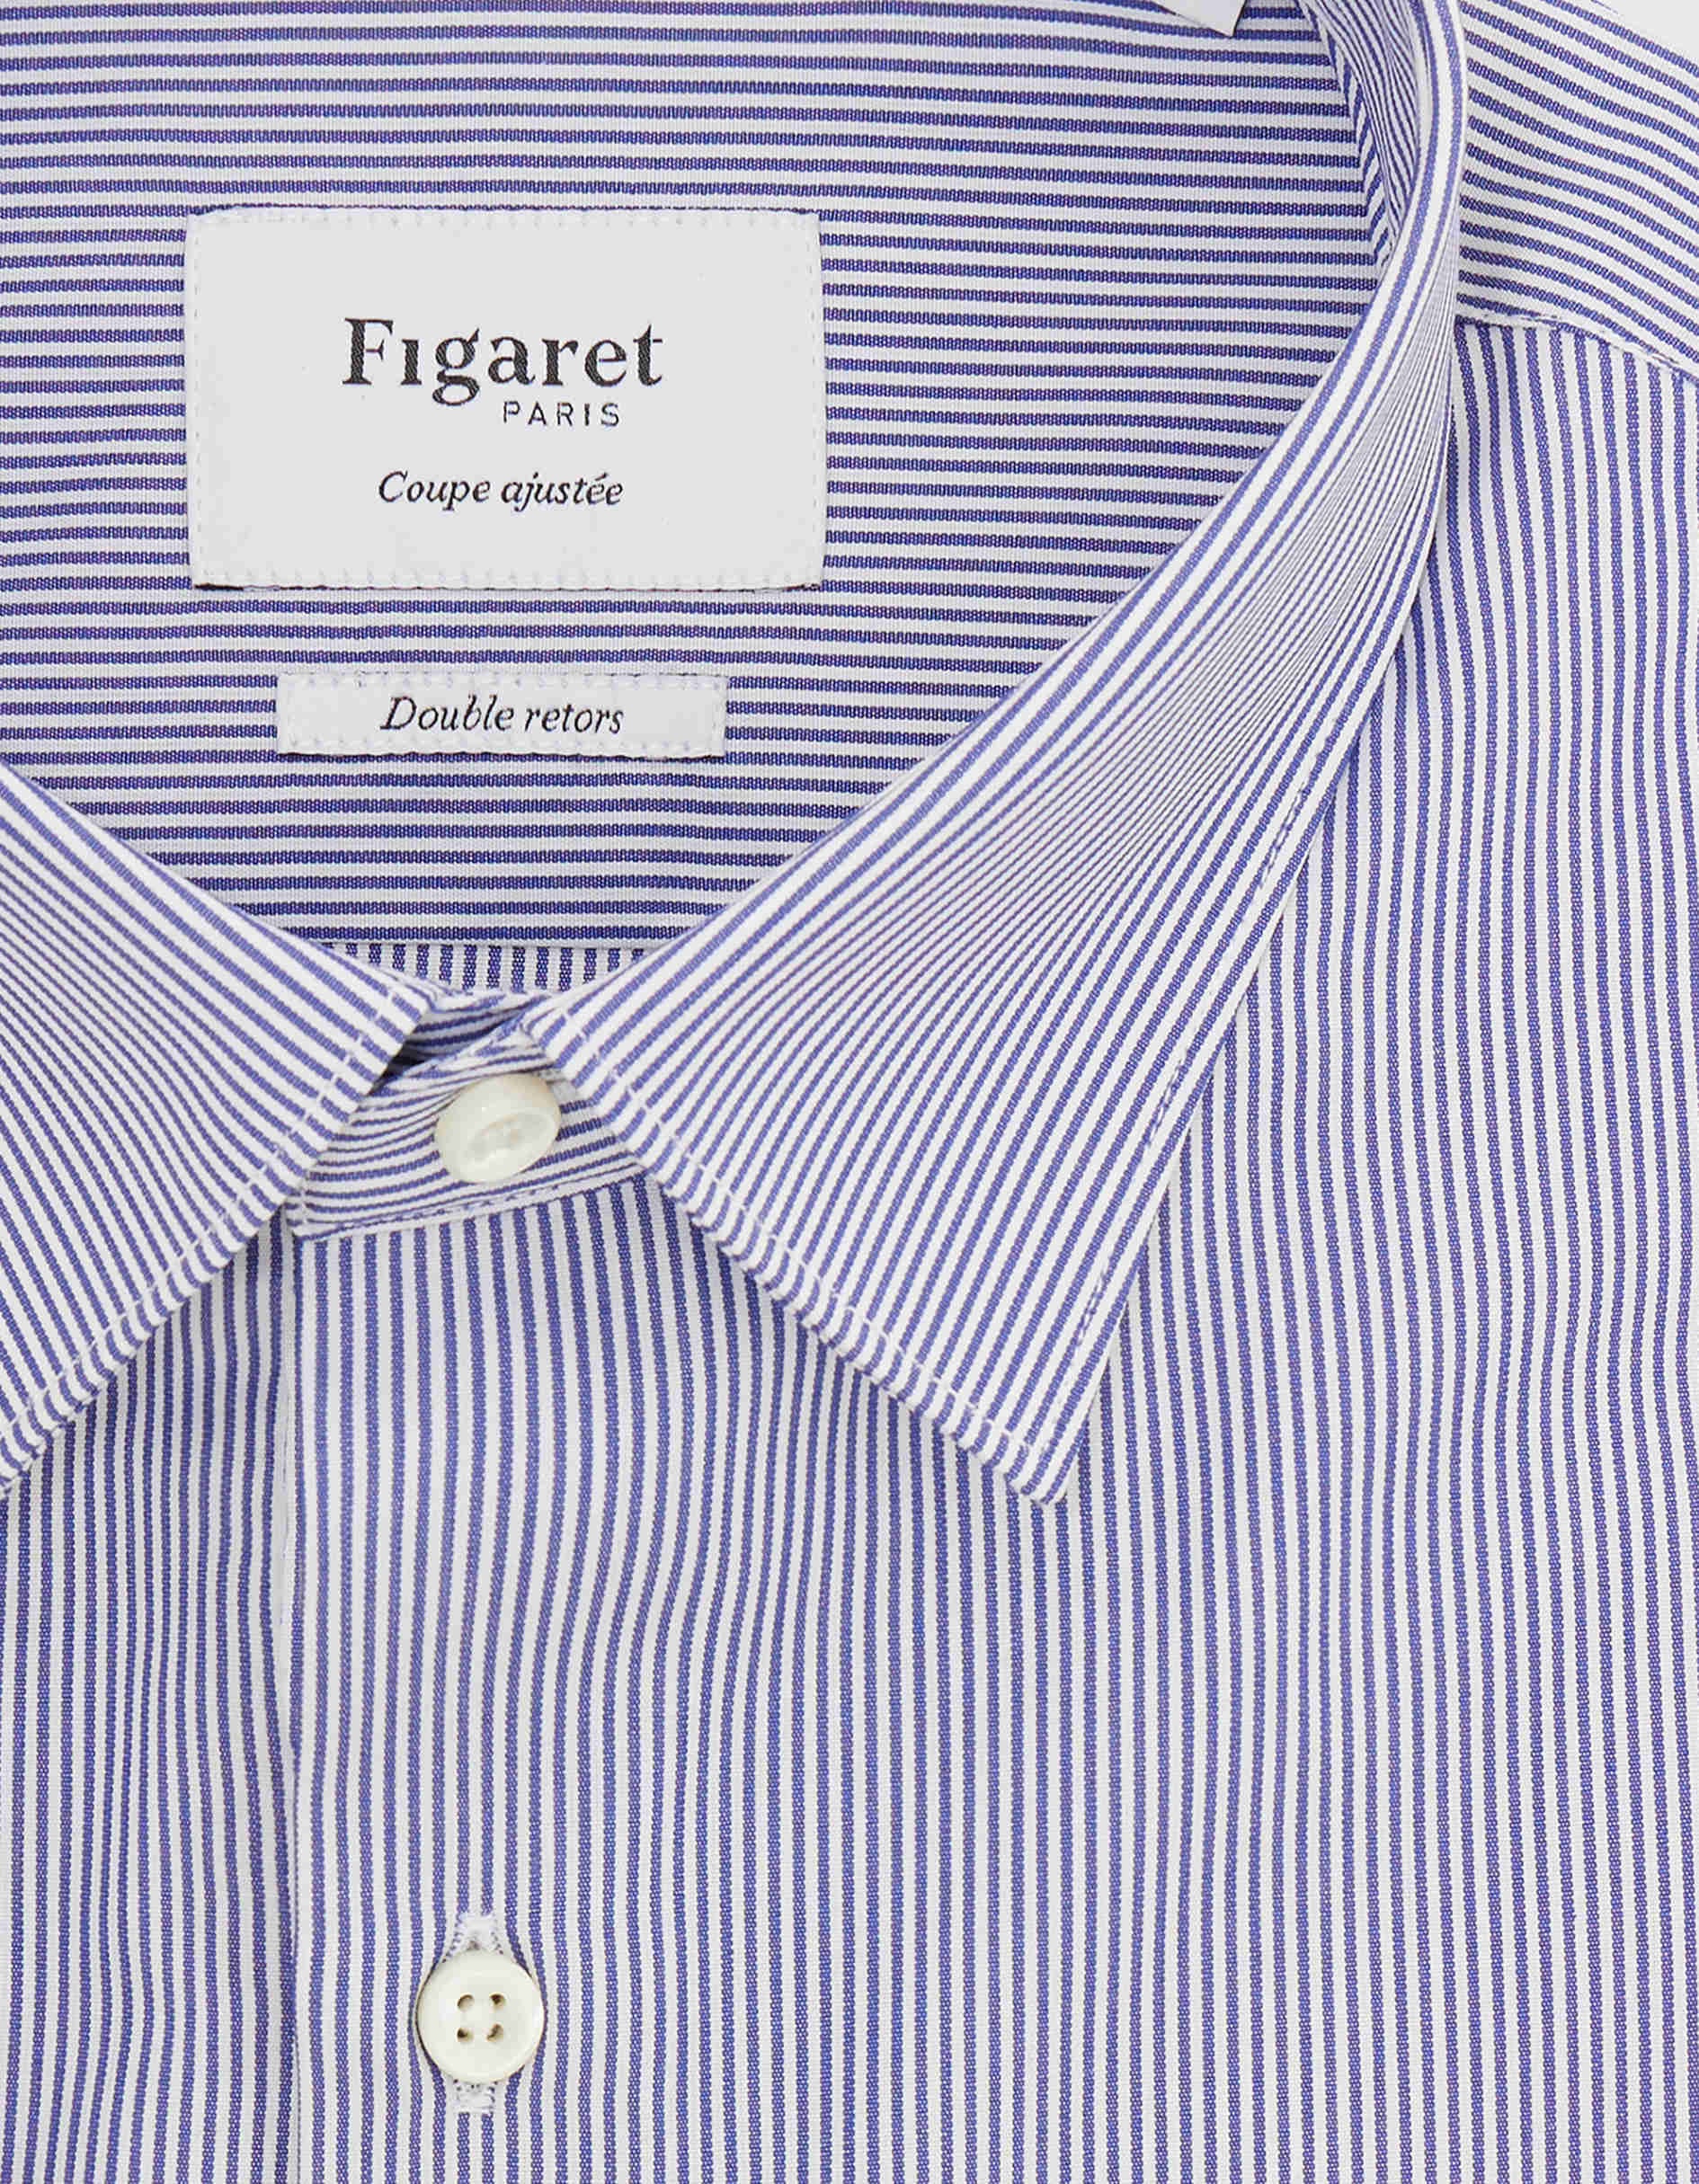 Blue striped fitted shirt - Poplin - Figaret Collar - Musketeers Cuffs